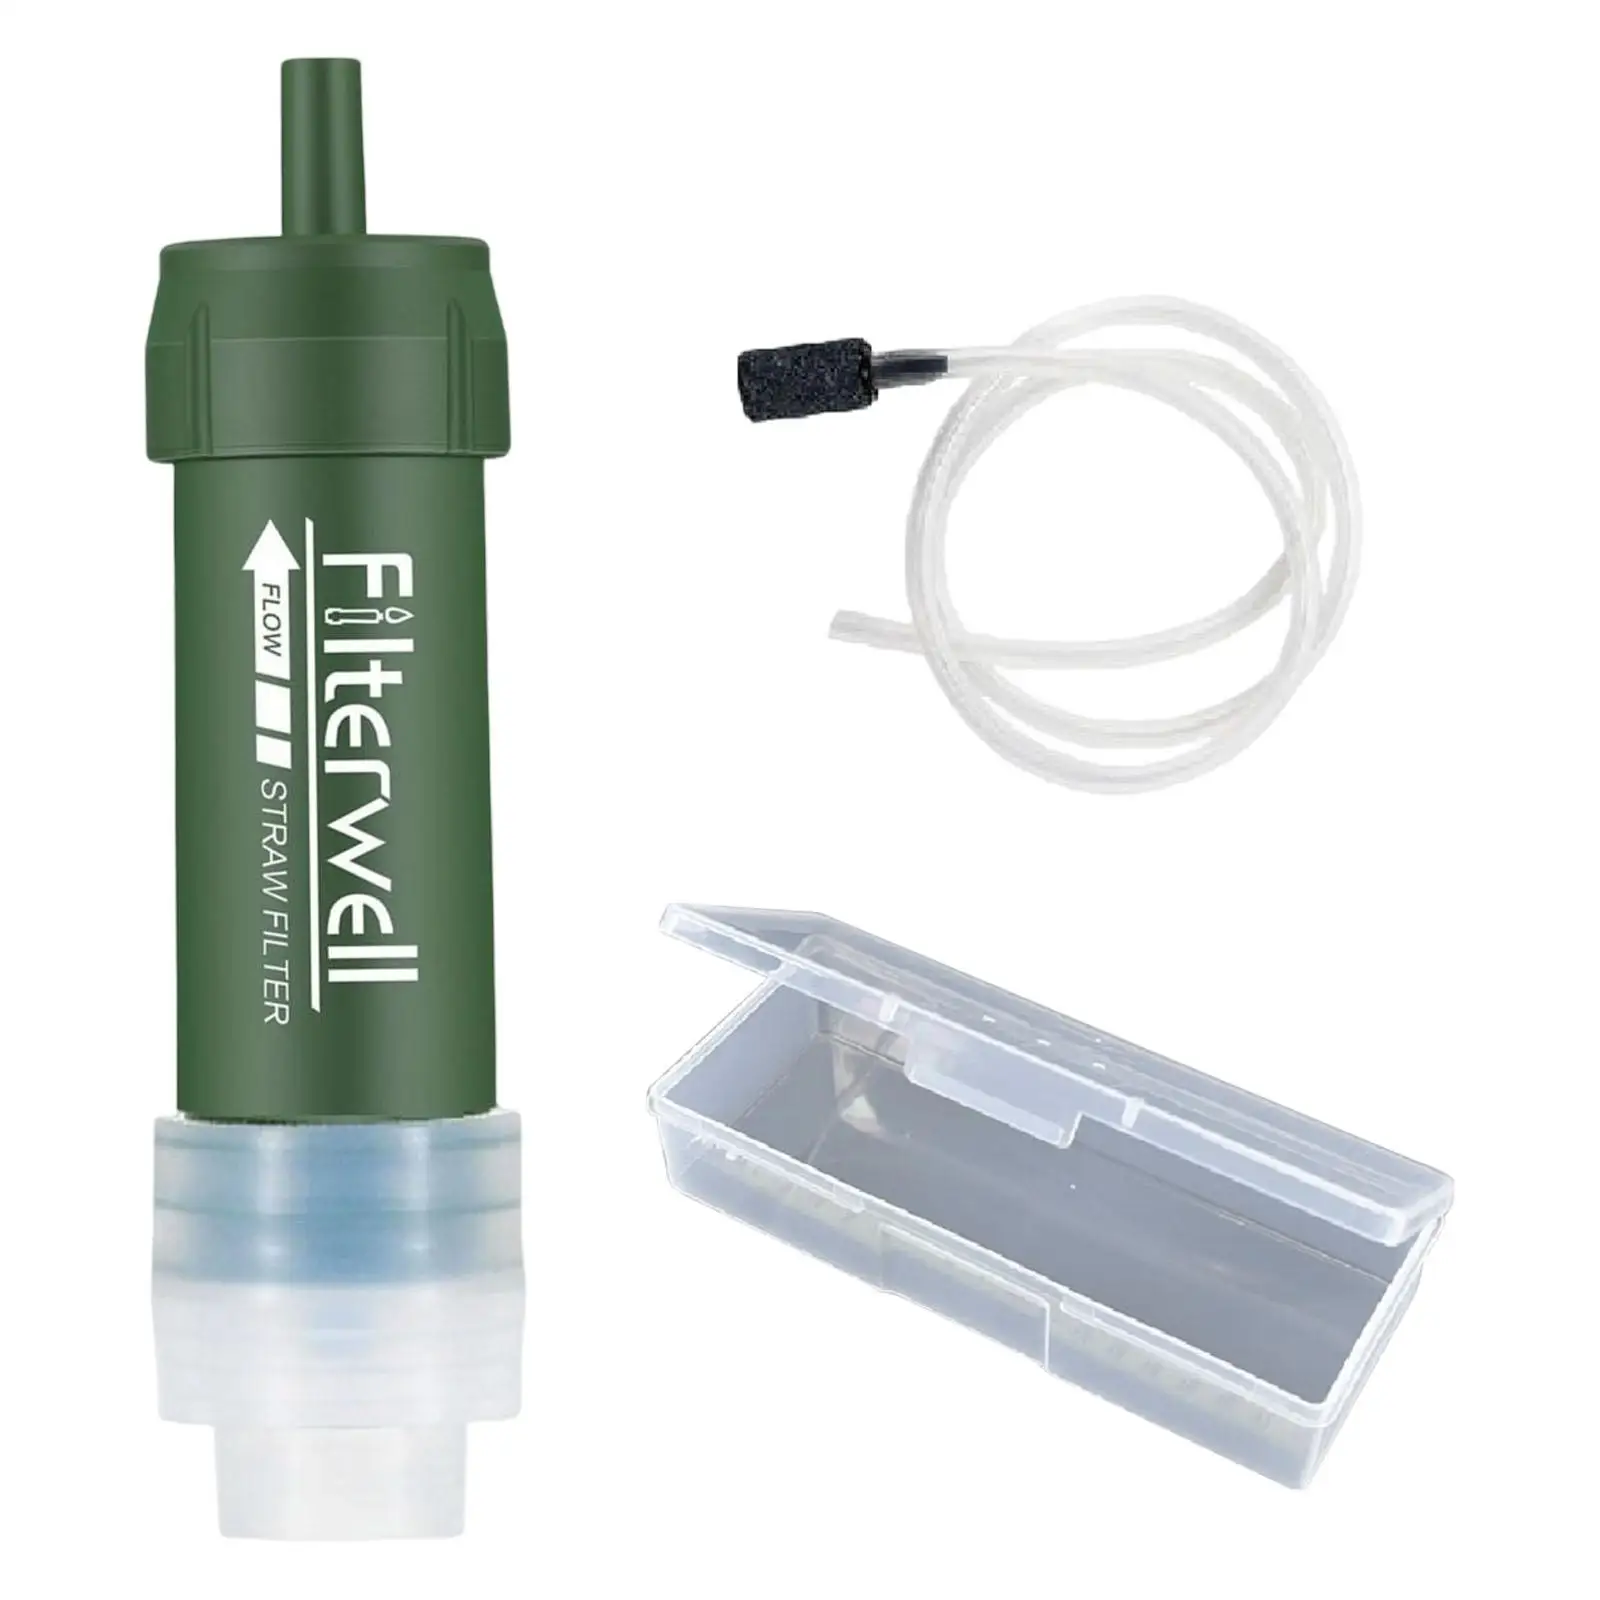 Personal Water Filter Straw Purifier Filtration System Camping Survival Drinking Water Solutions for Travelling Hiking Hunting